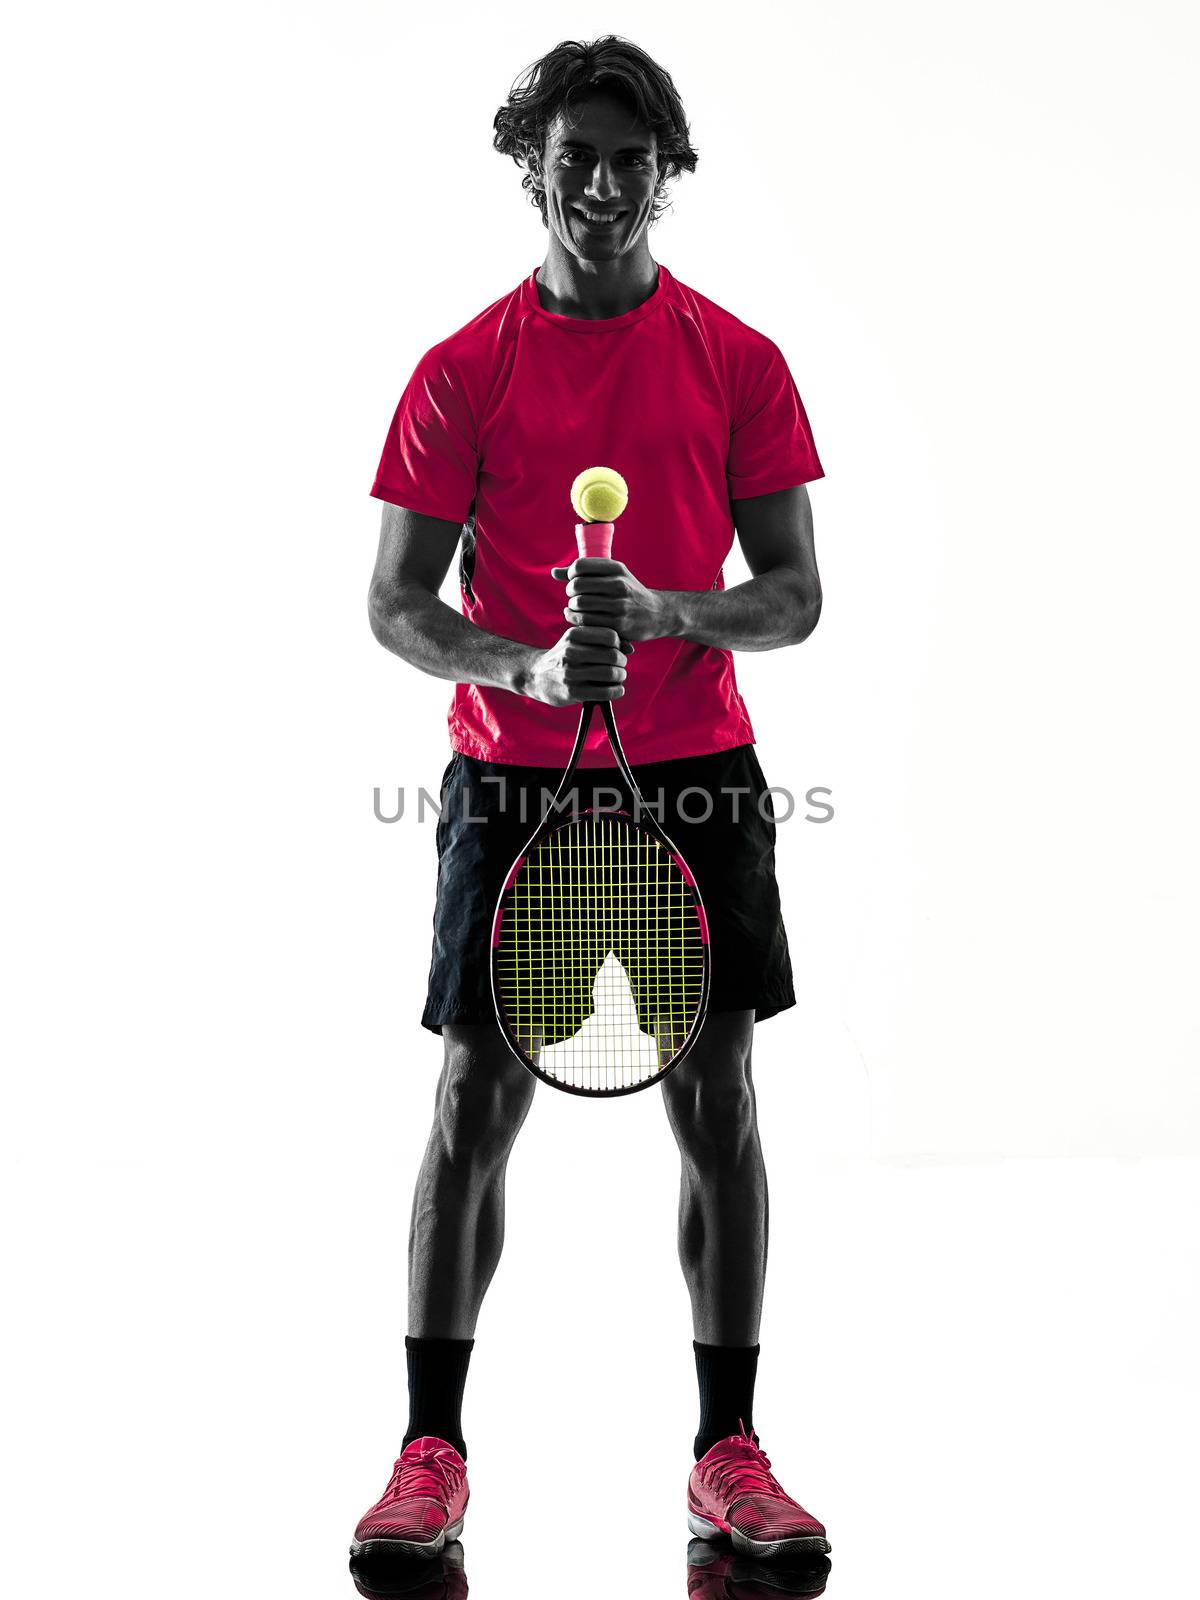 tennis player man silhouette isolated white background by PIXSTILL